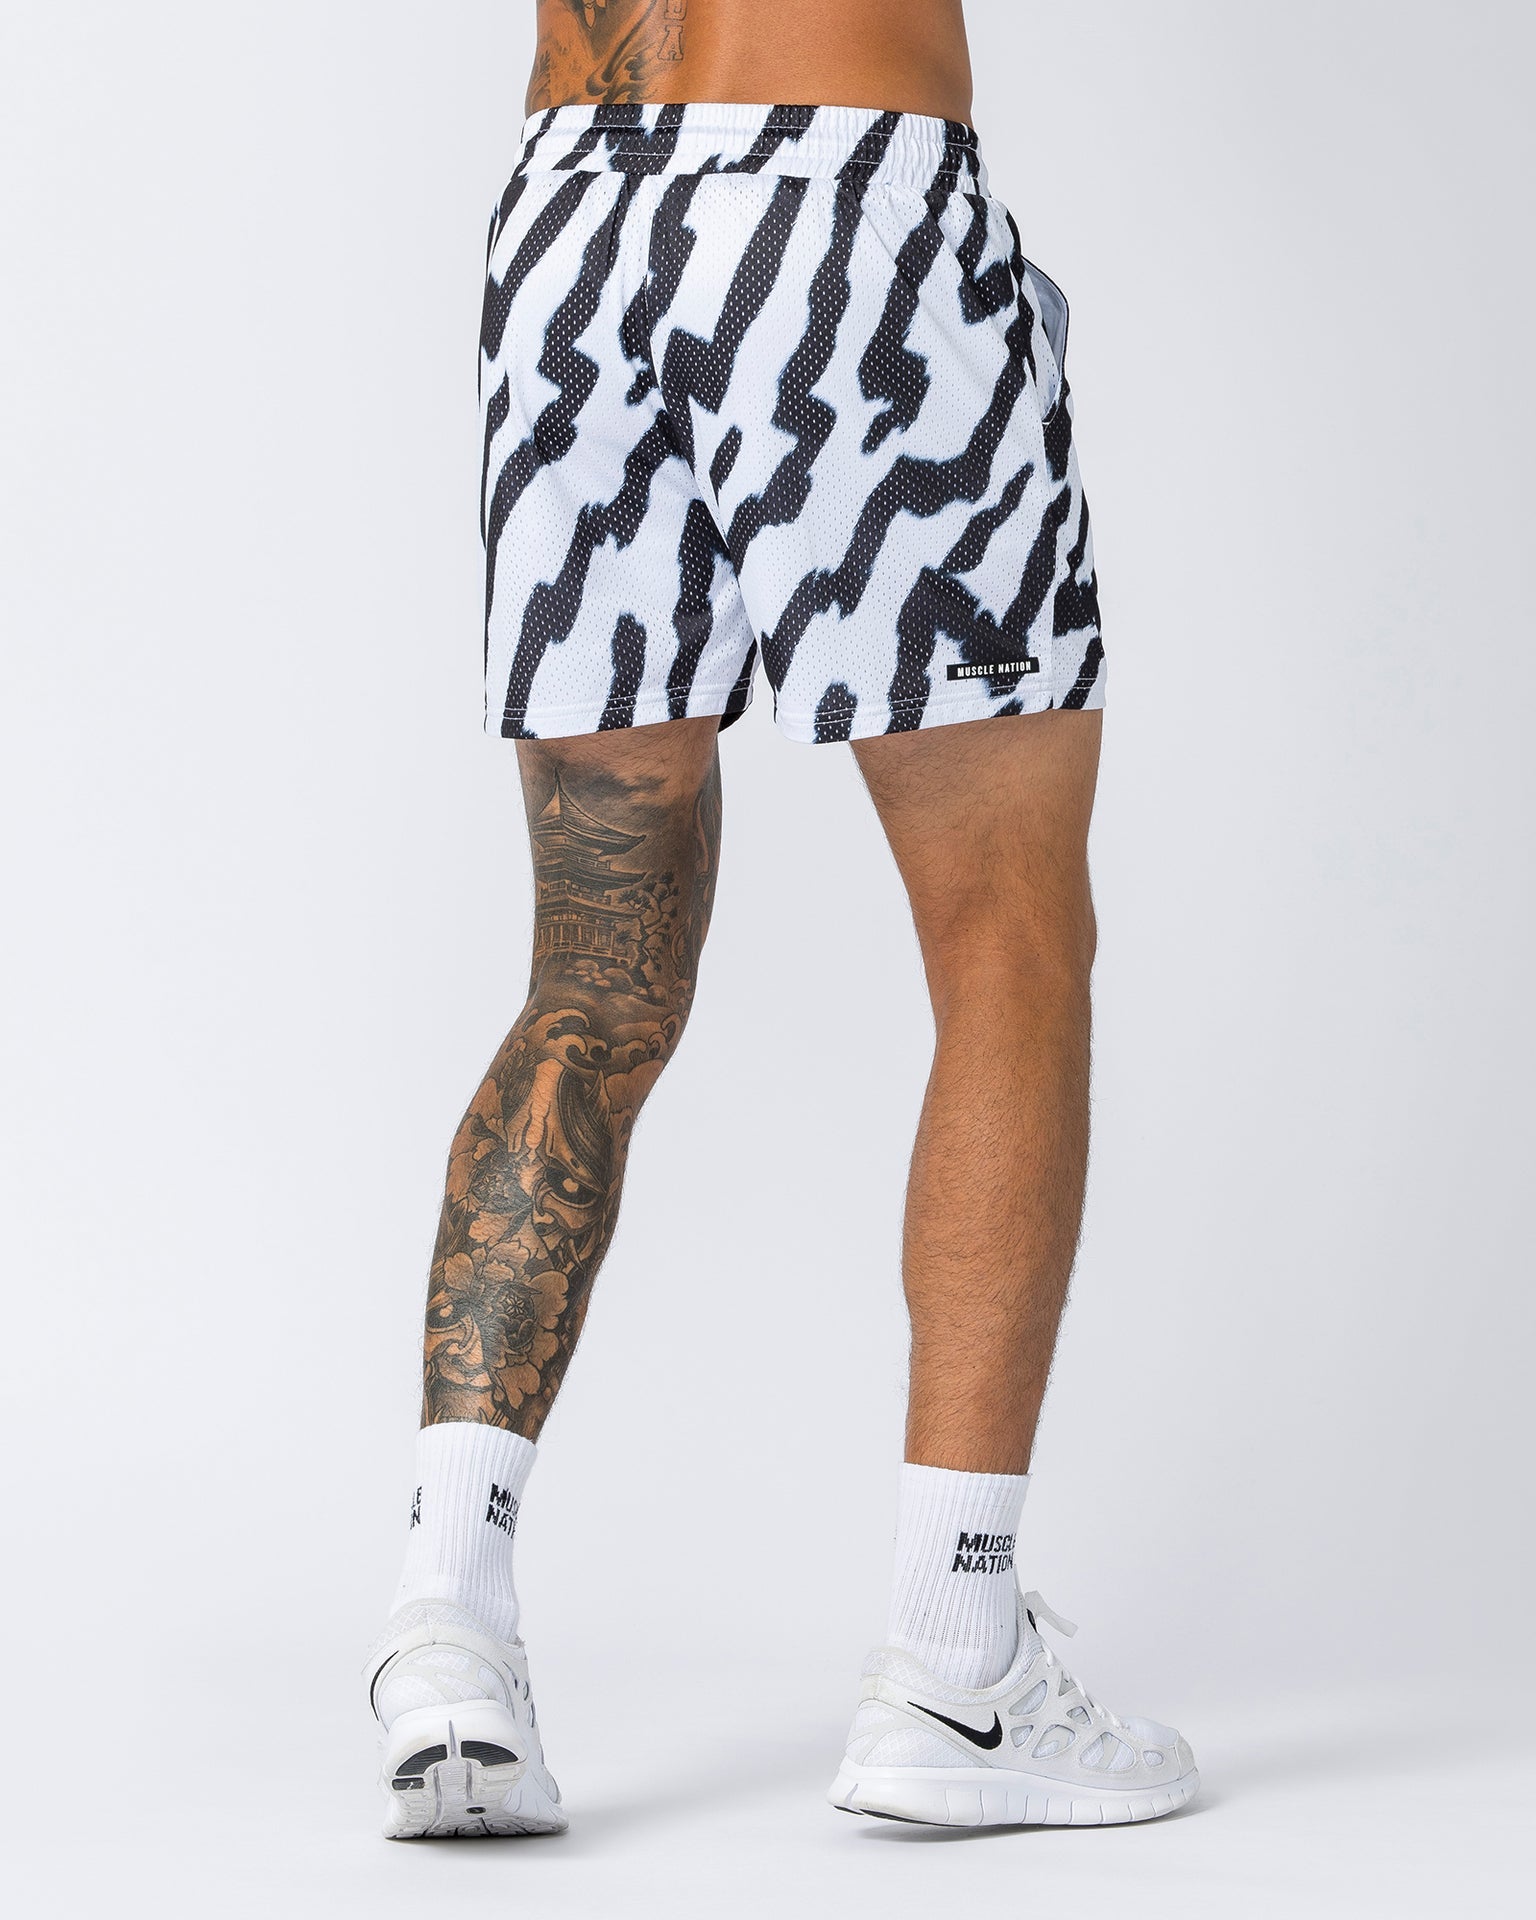 Muscle Nation Gym Shorts Lay Up 3.5" Shorts - Monochrome Voltage Print